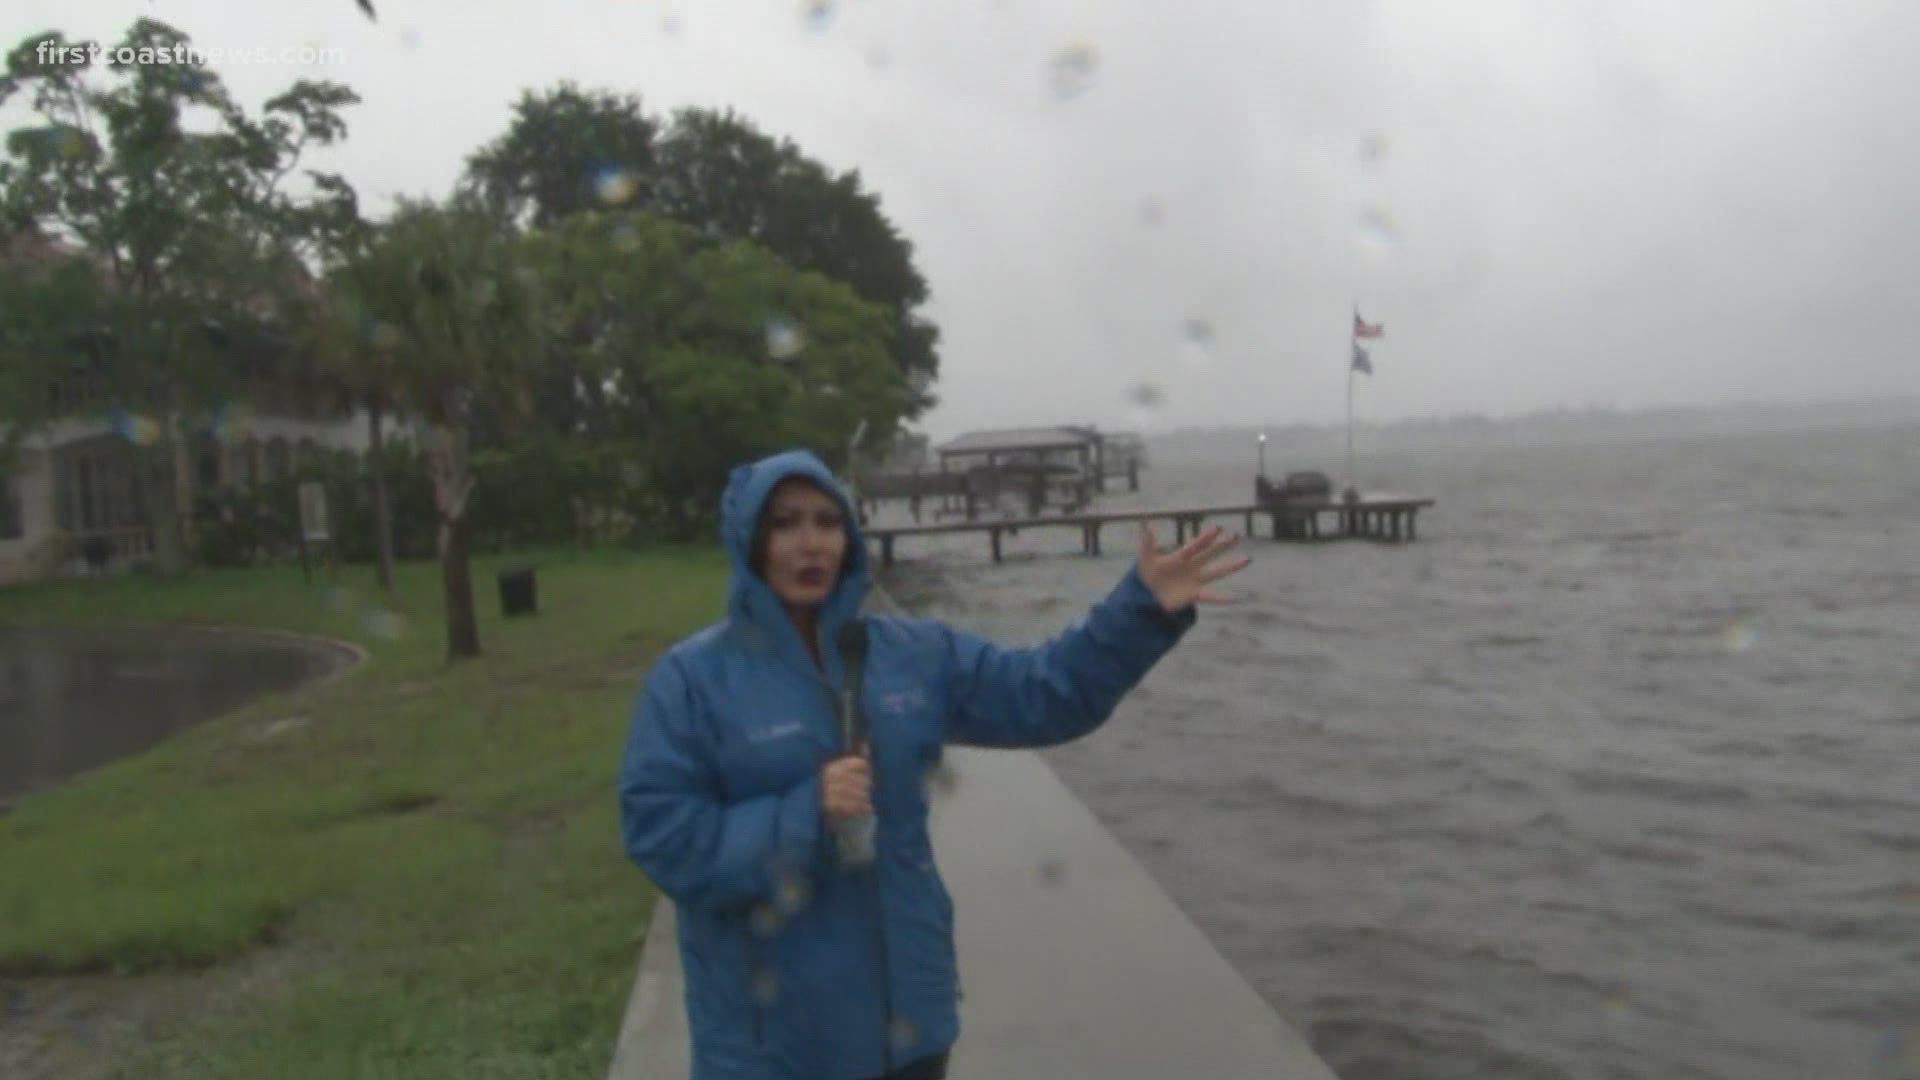 First Coast News crews noticed a water spout in the St. Johns River just before 4 p.m.